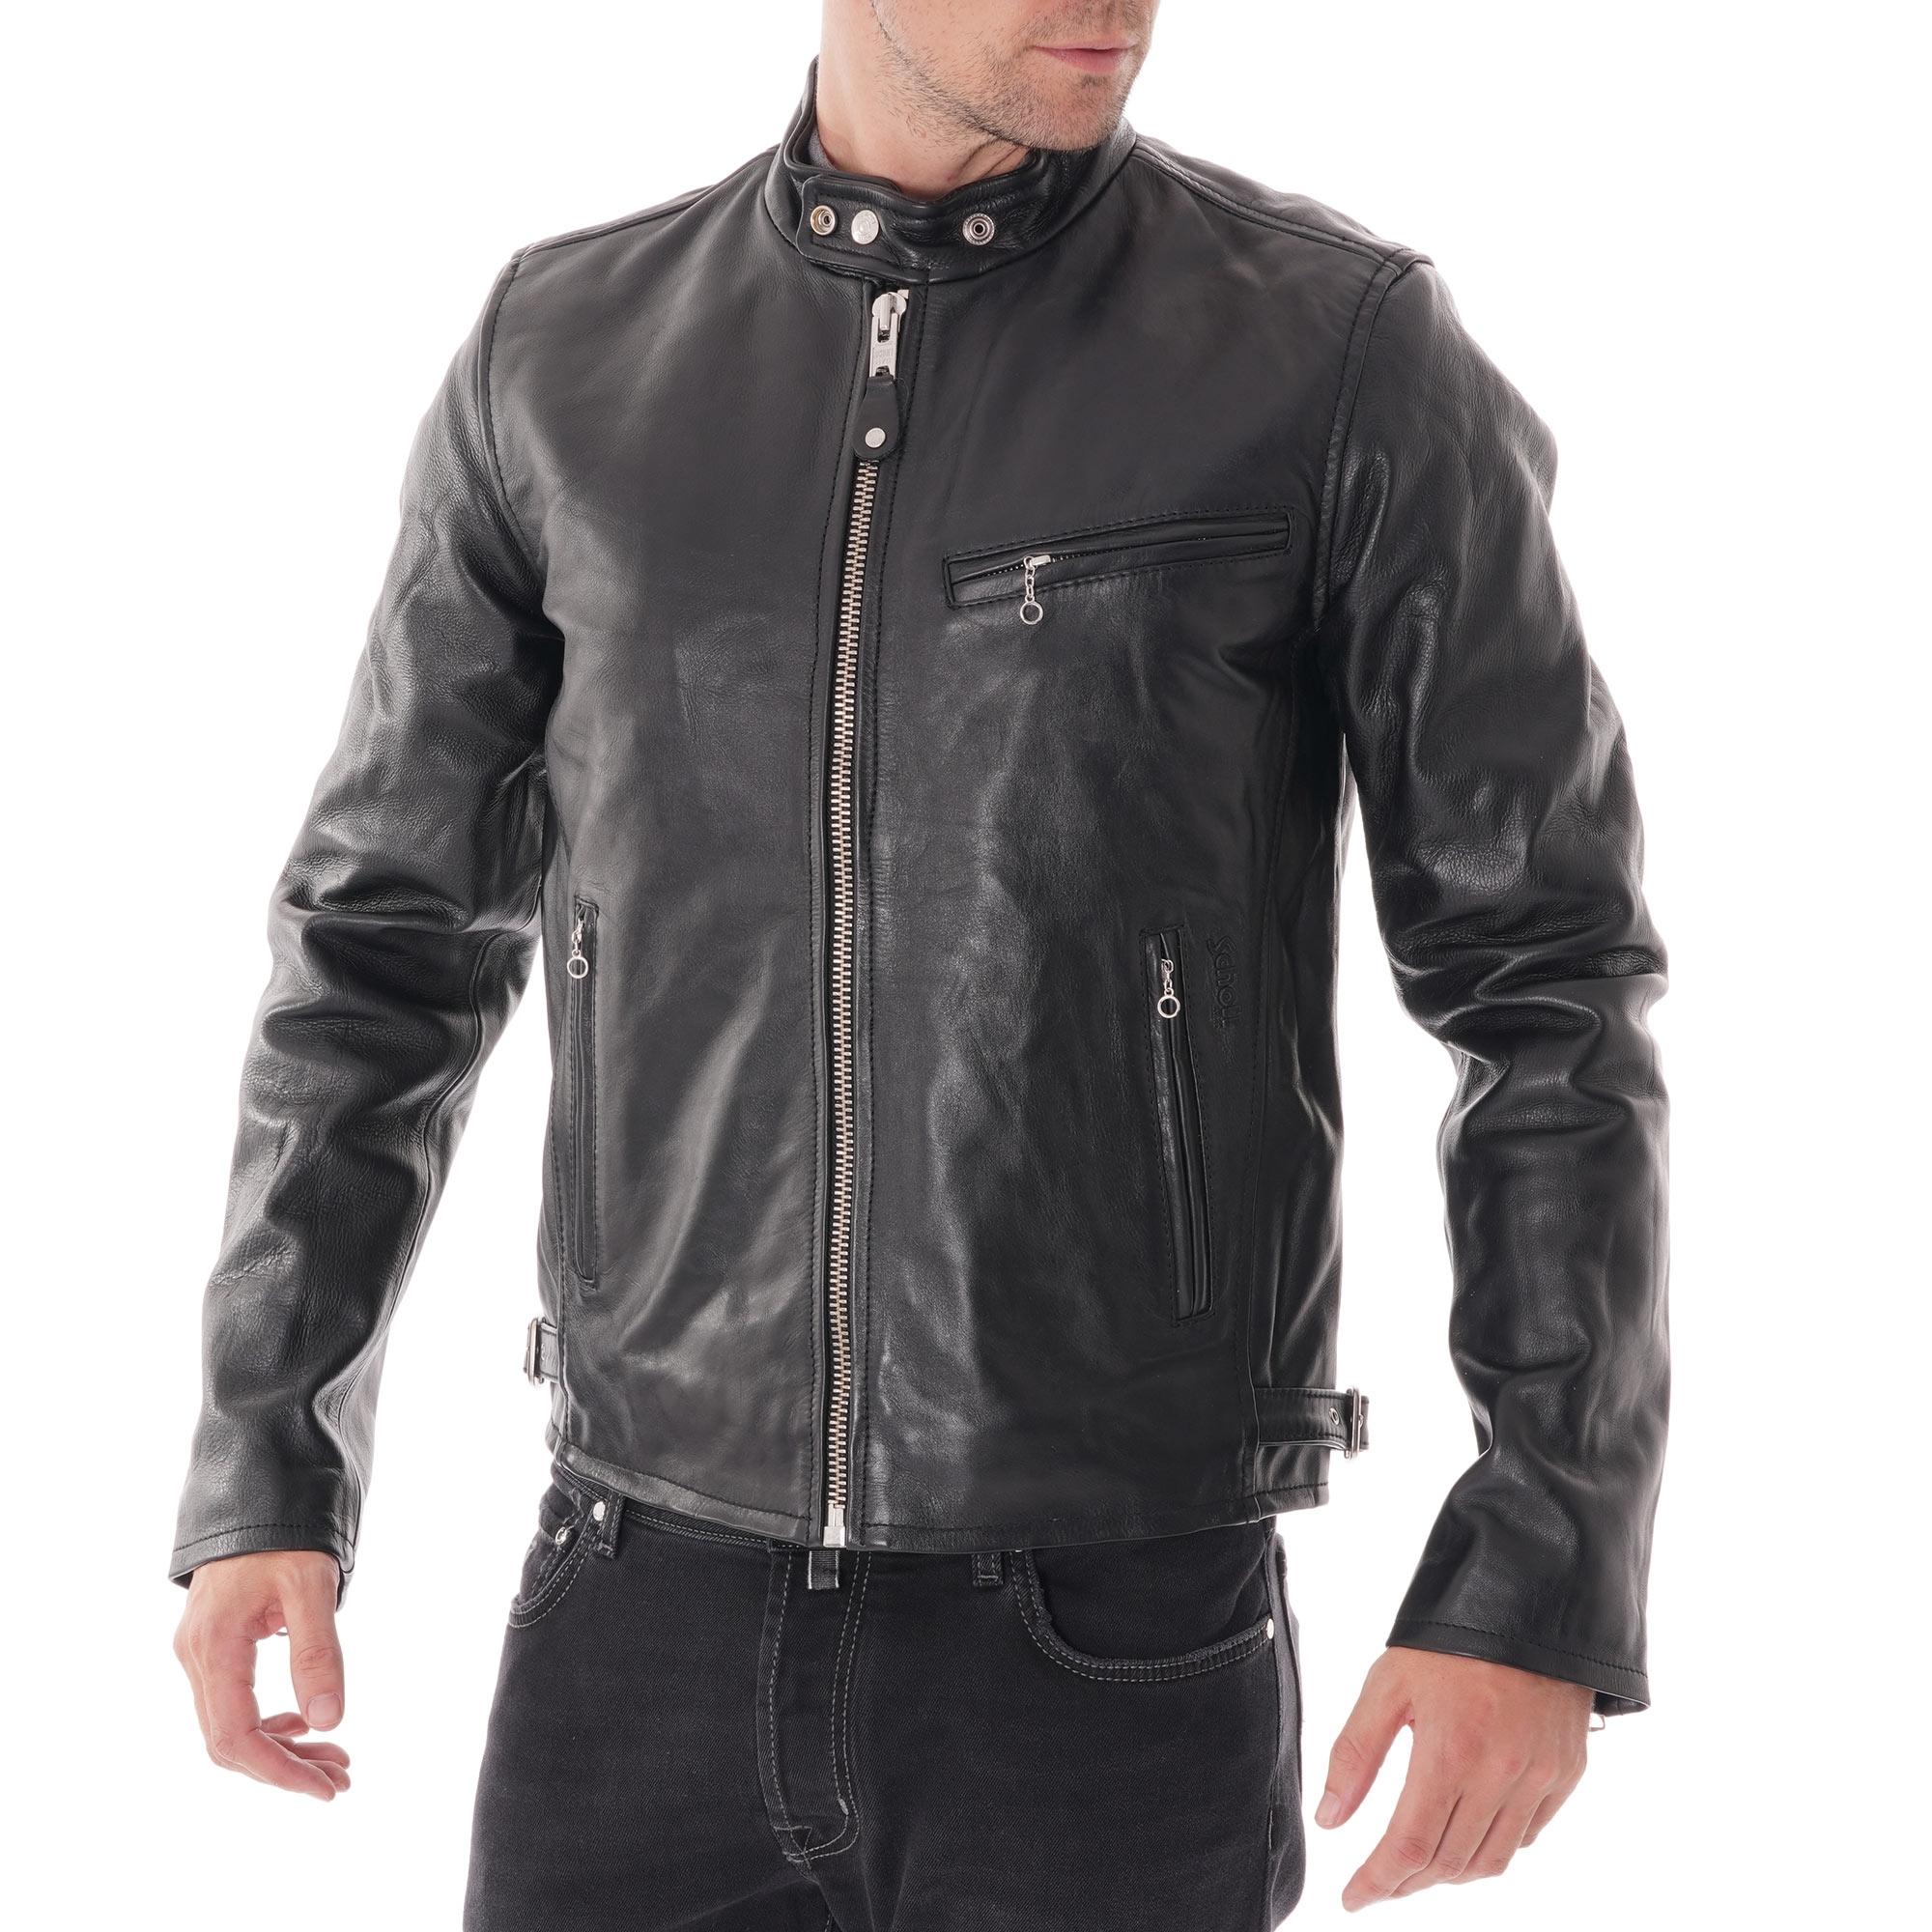 Schott Nyc Classic Racer Black Leather Jacket Lc940d for Men - Lyst